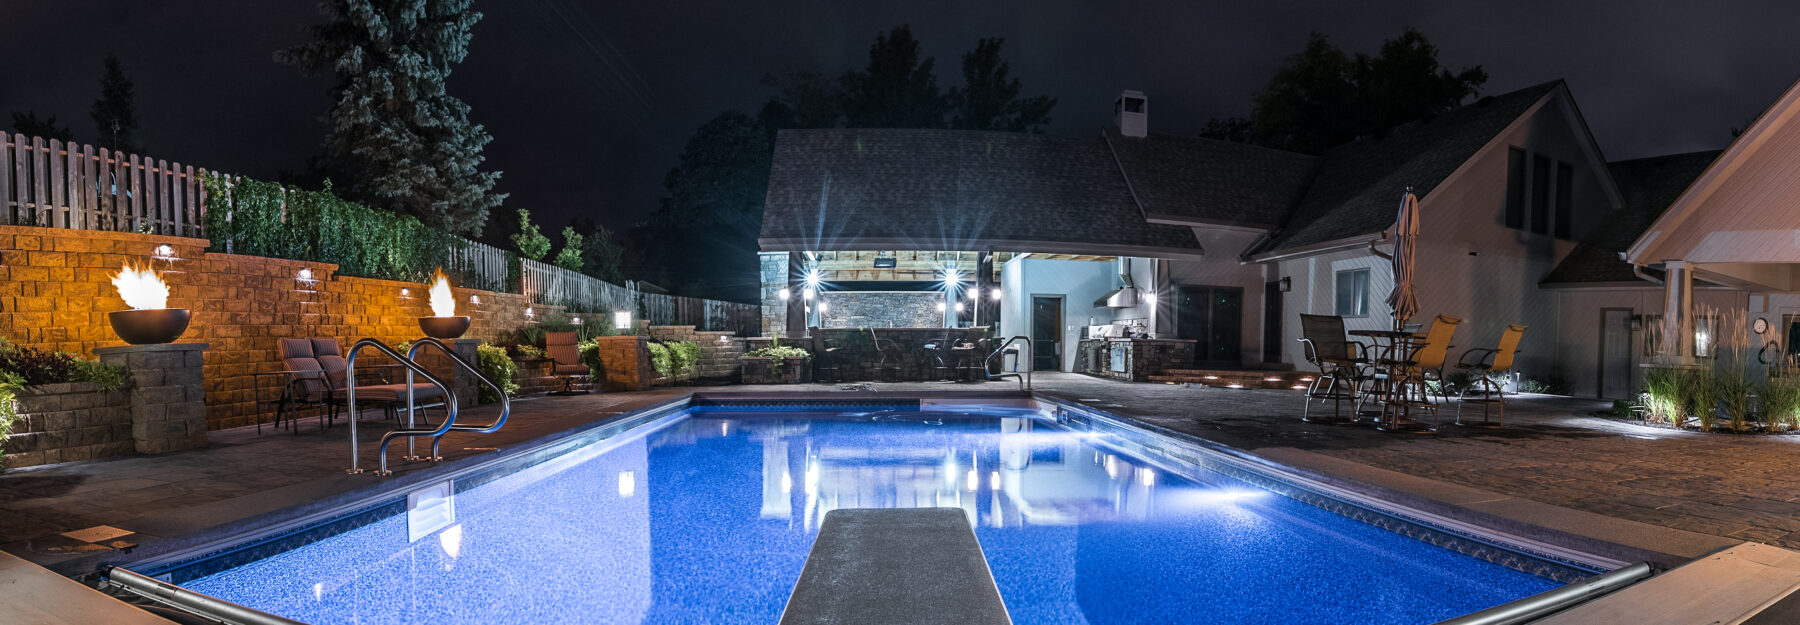 custom pools in Sioux Falls and Rochester, MN